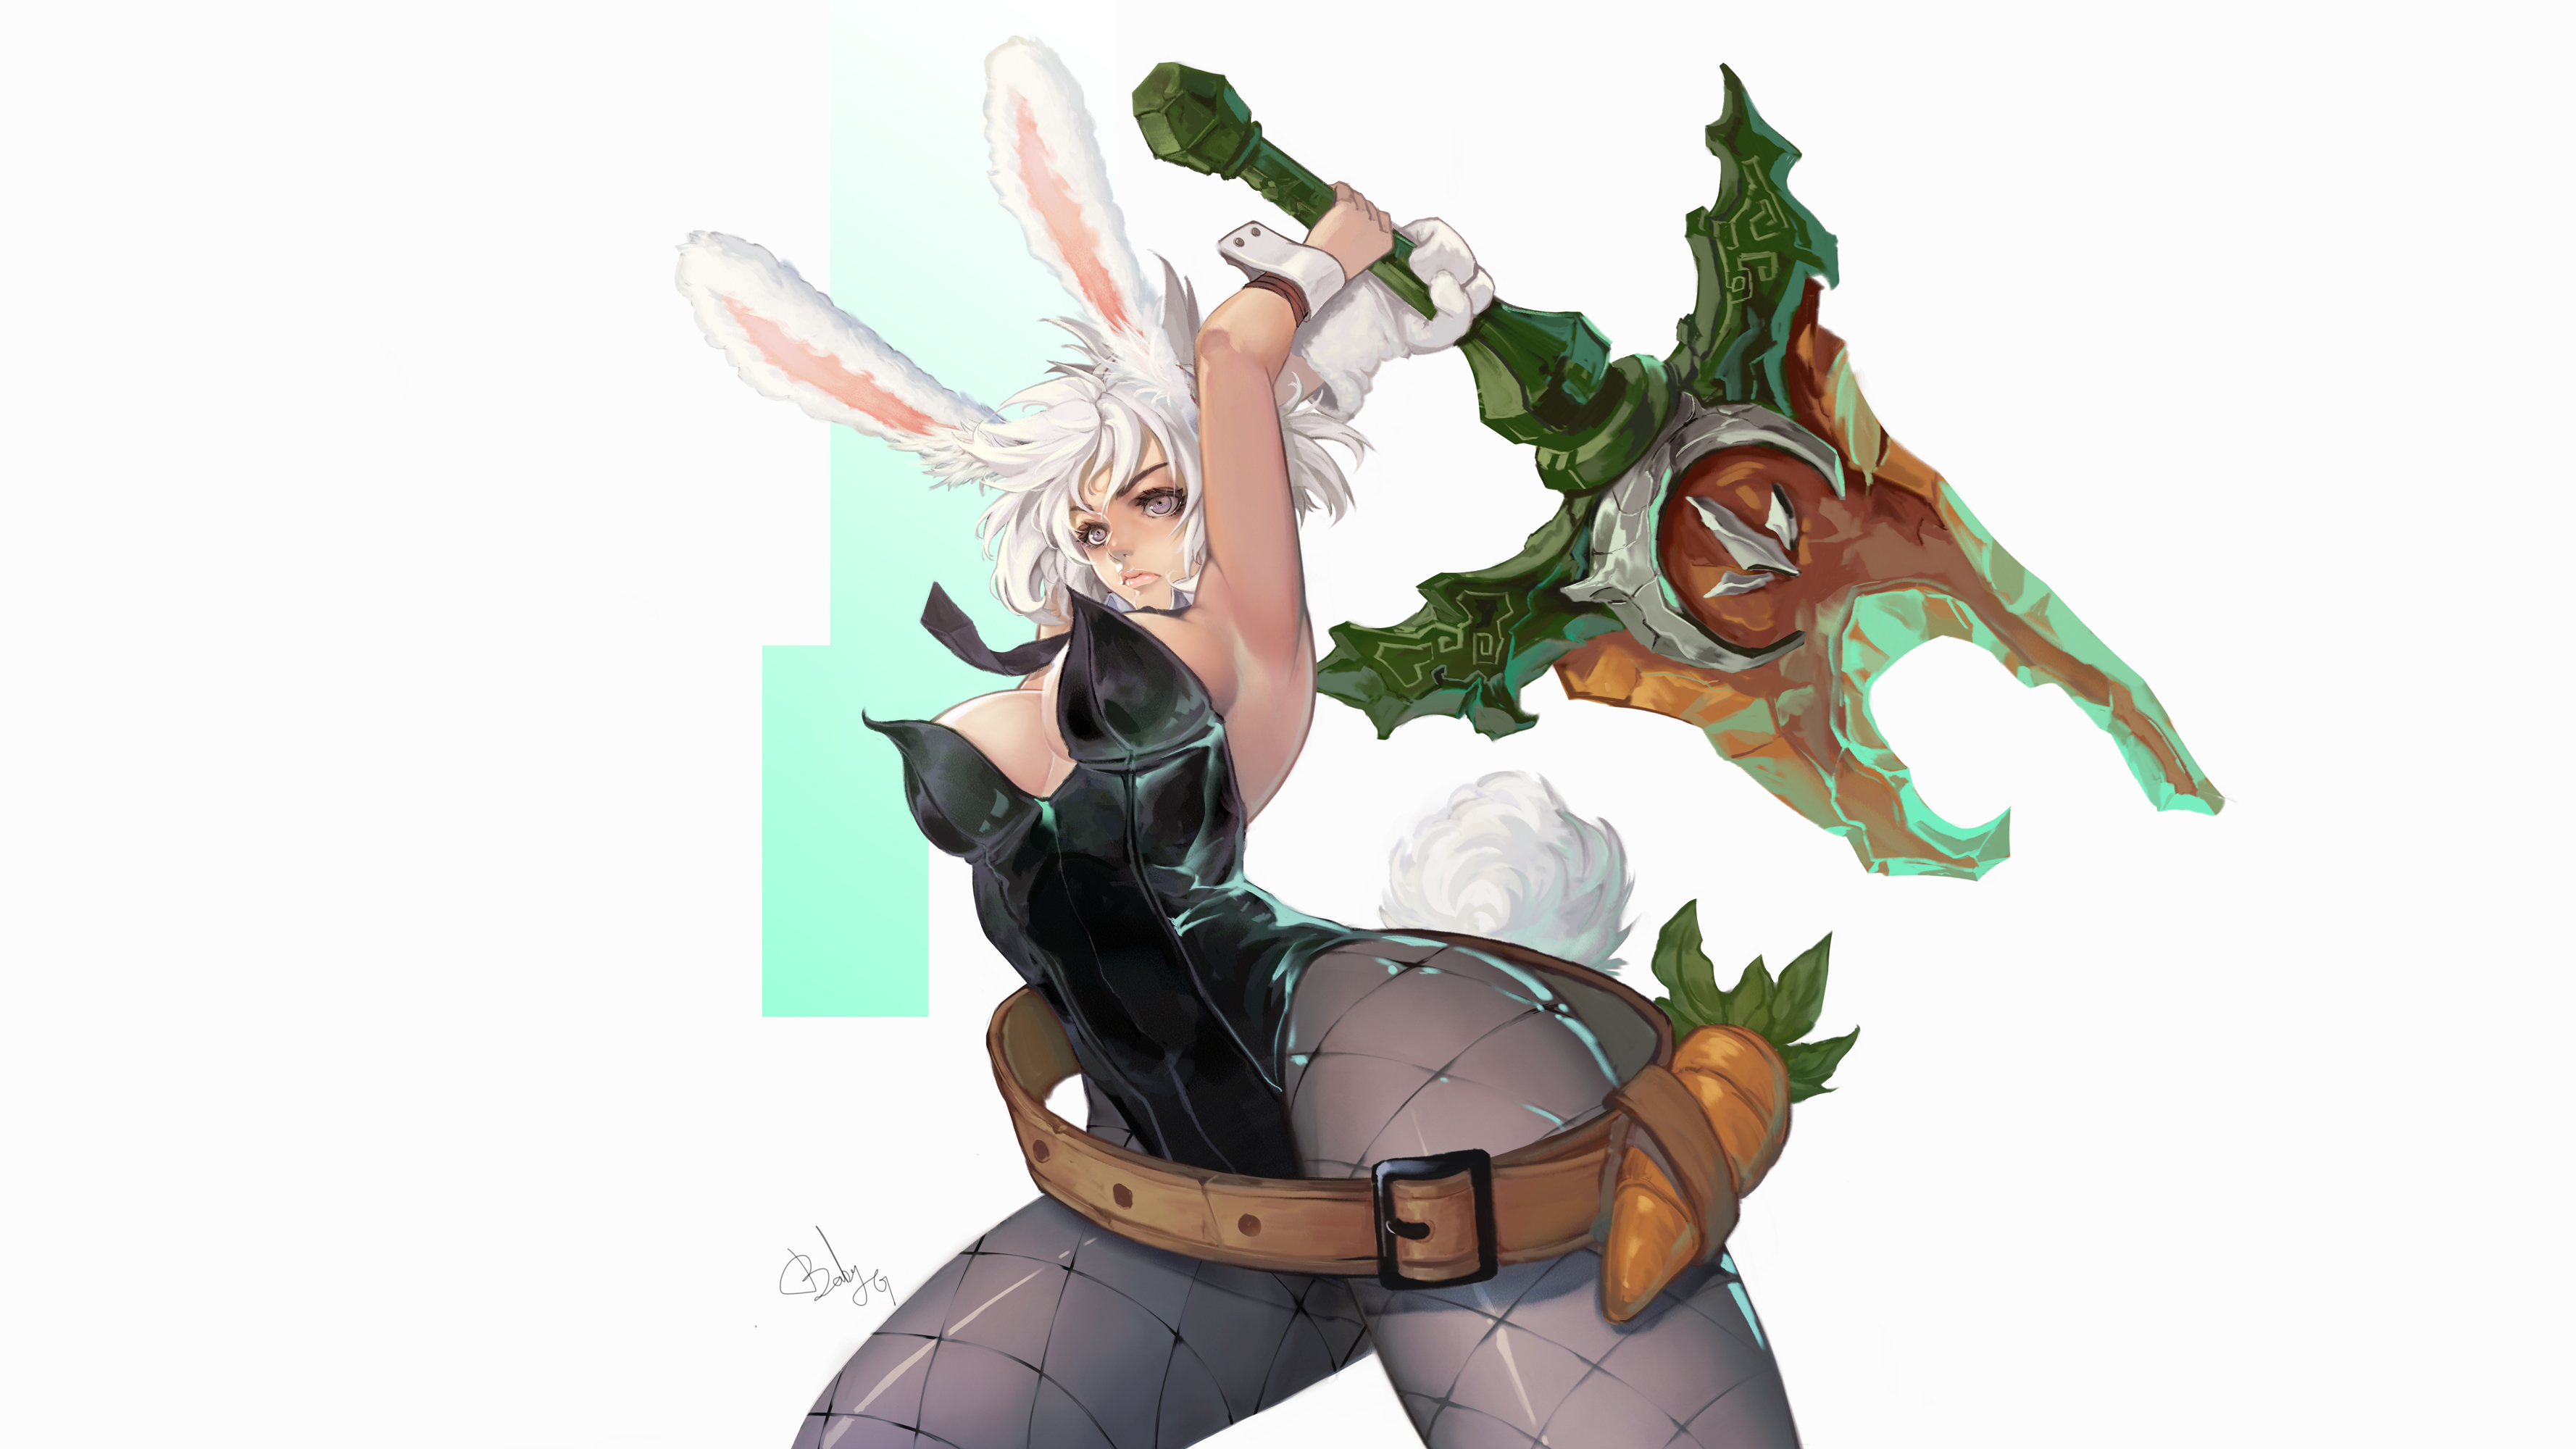 Source. riven and battle bunny riven (league of legends) drawn by. danbooru.donmai.us. 